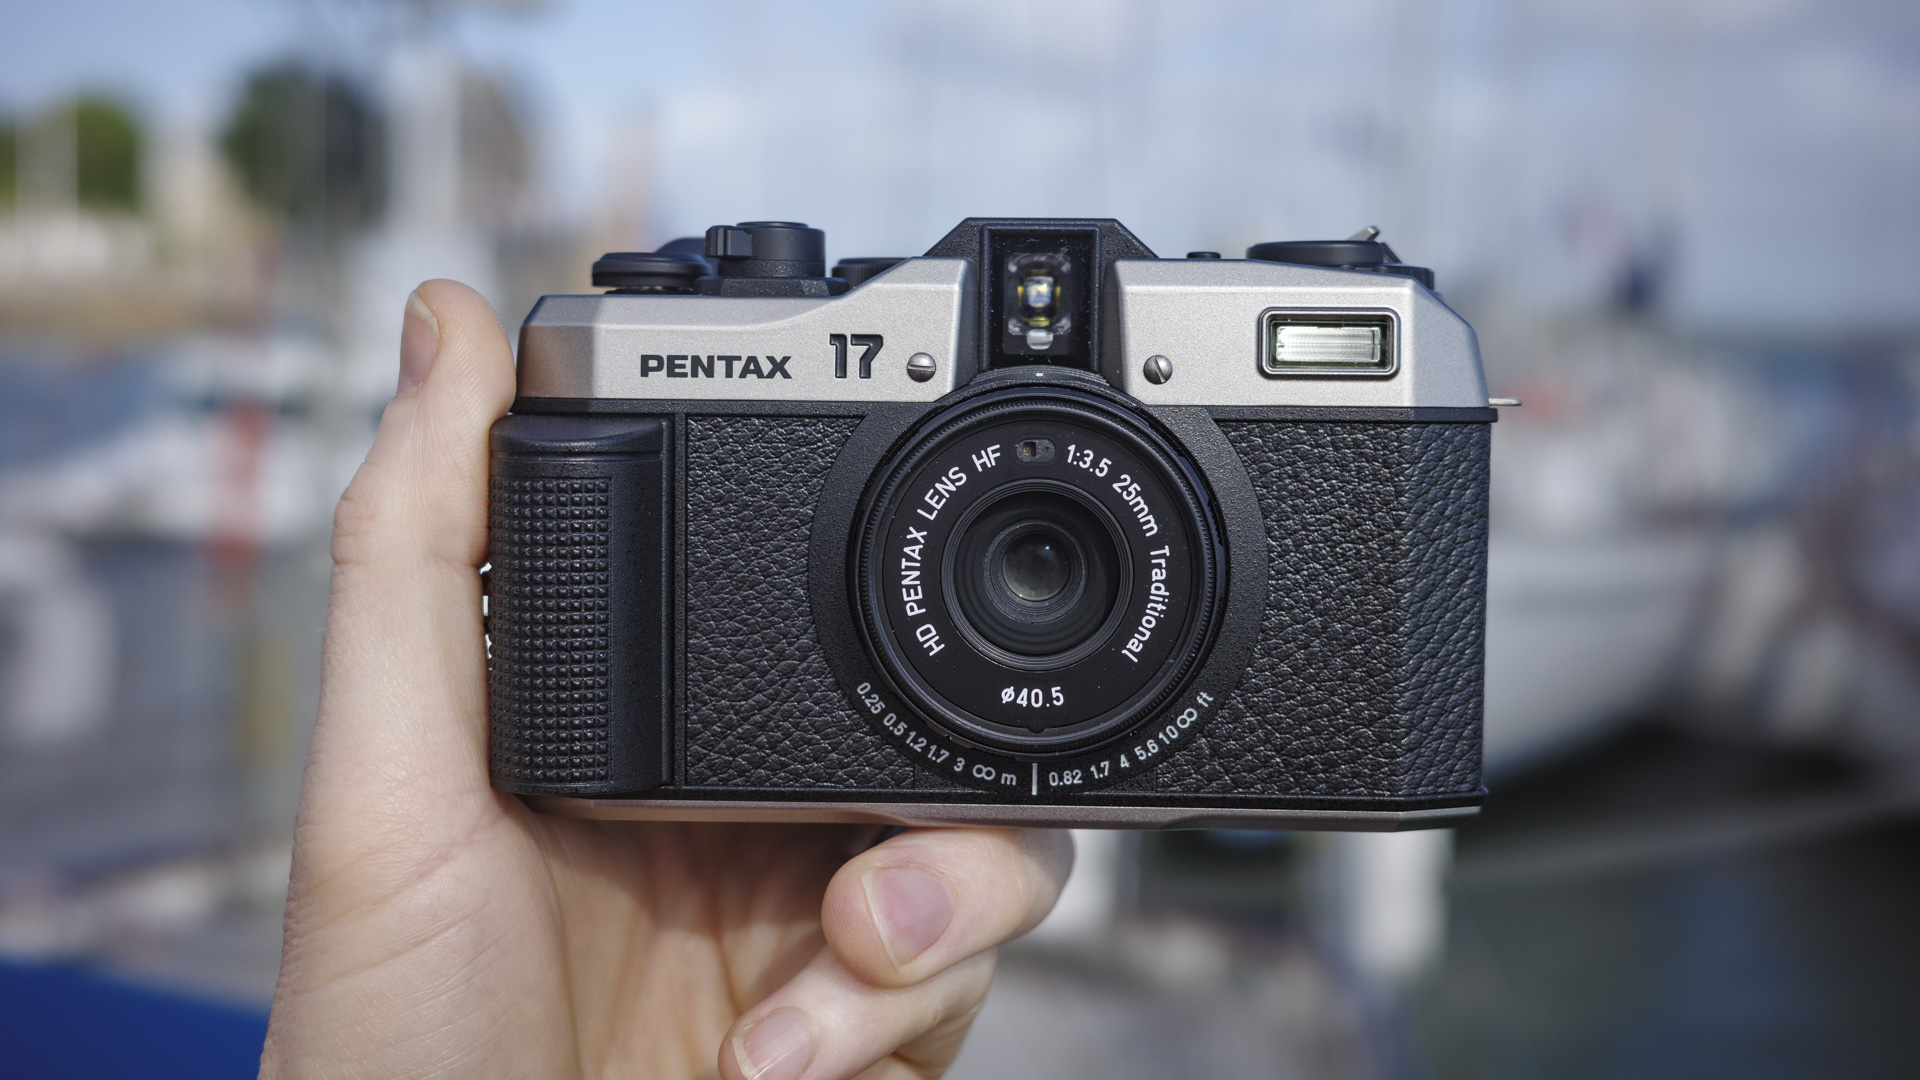 Pentax revives analog with its first film camera in over 20 years – and the pricey retro package has won me over